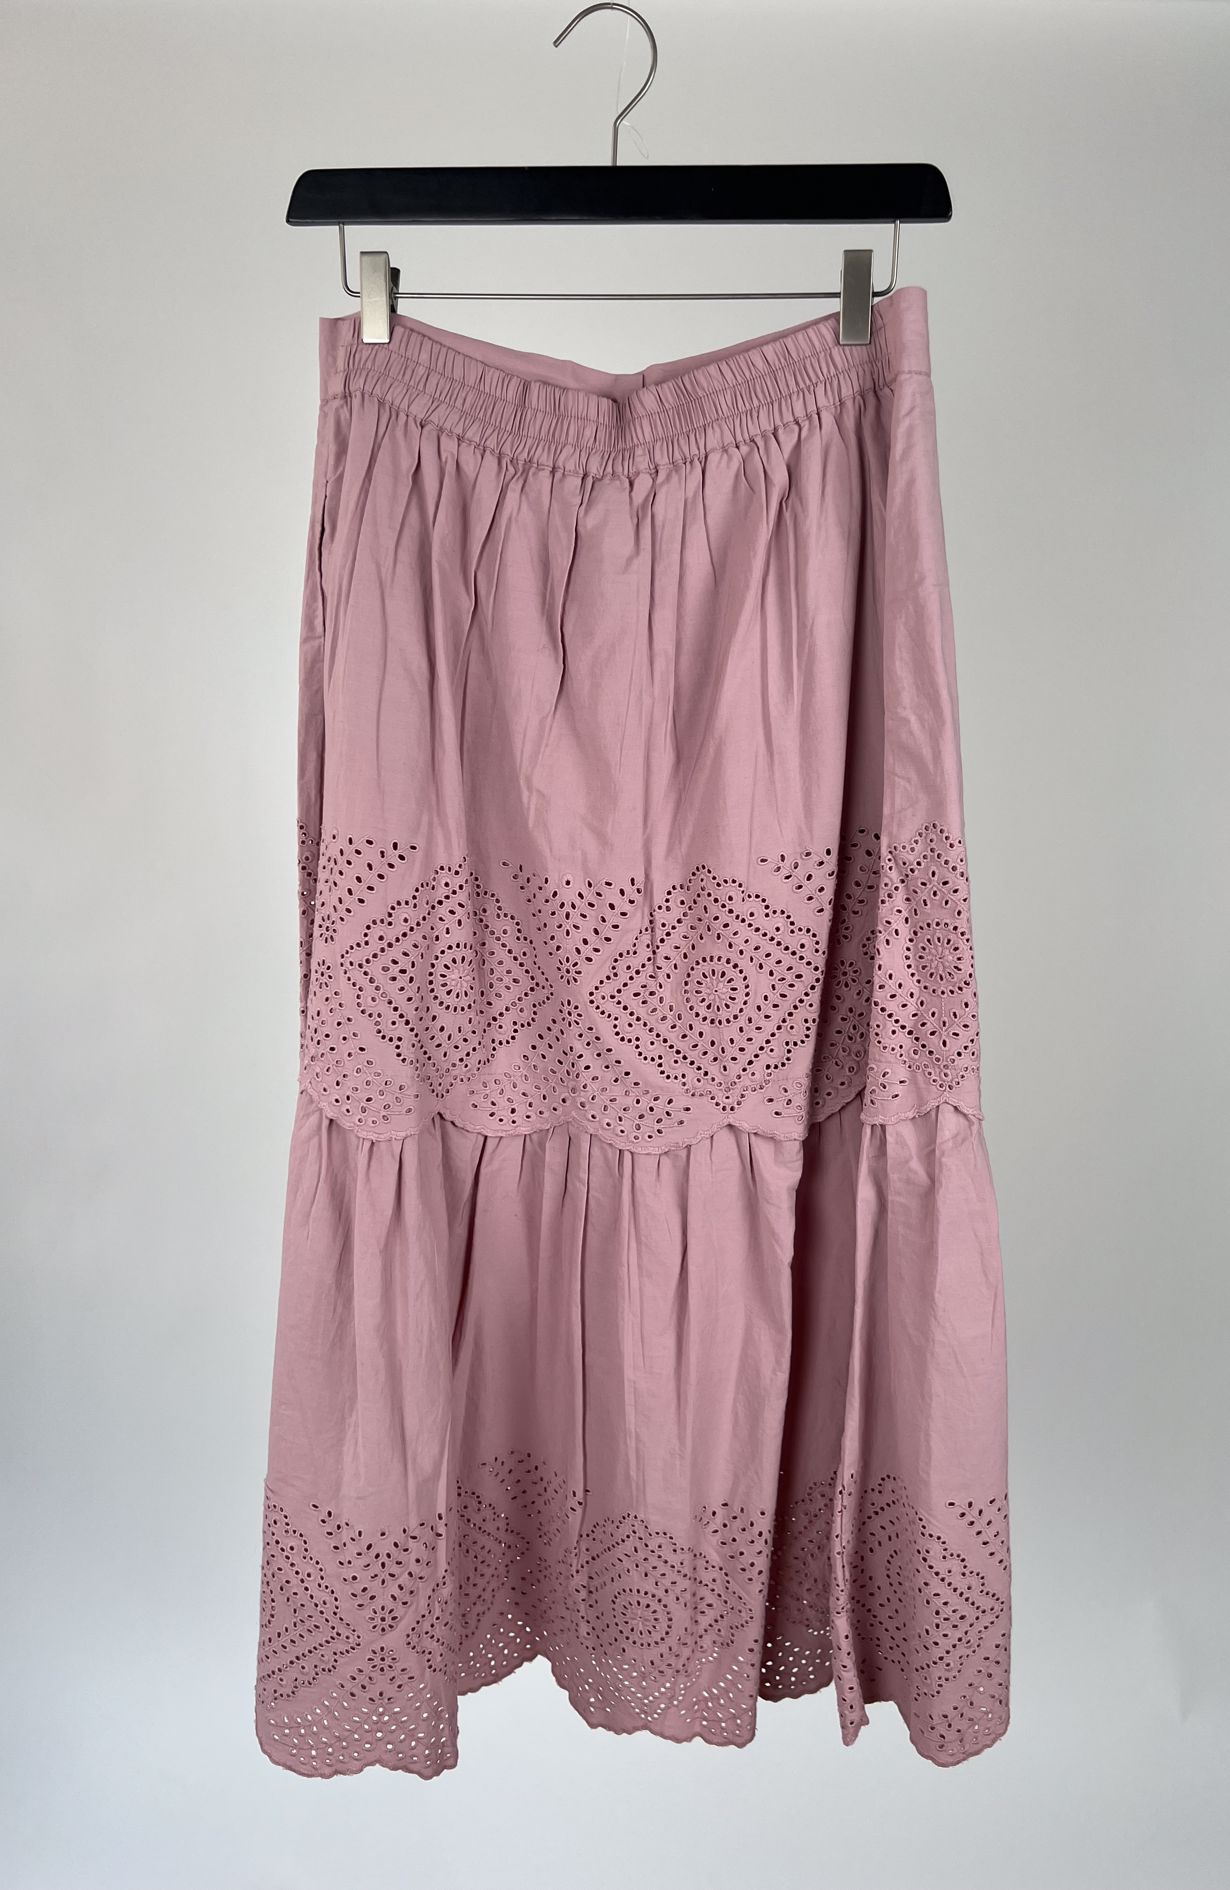 Sea New York skirt pink embrodery size L